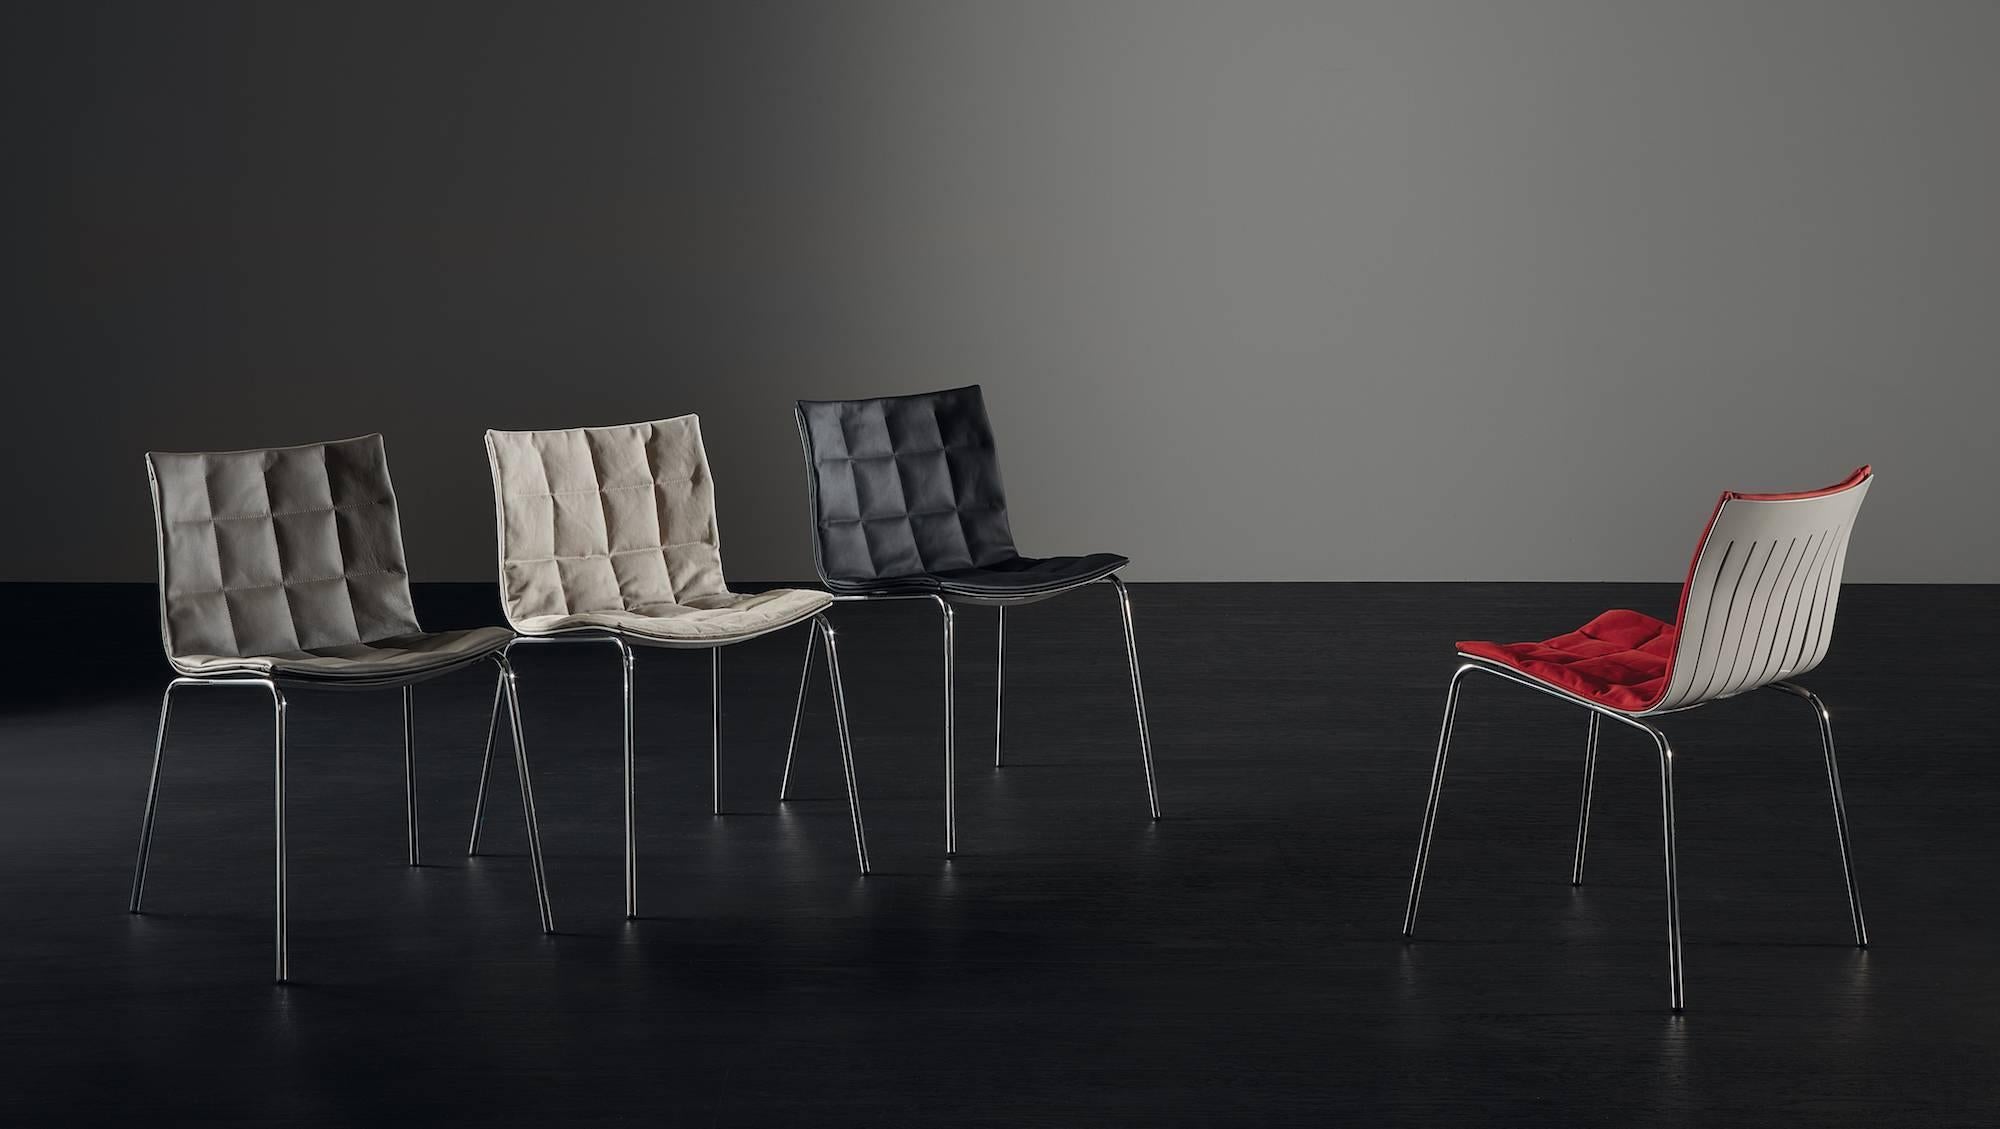 A soft, continual line which gives a comfortable, ergonomic seat with a matching, extremely light base. Airy is a chair with a sinuous, comfortable shape, made with a lightweight molded aluminum shell and soft cushions with quilted stitching. The